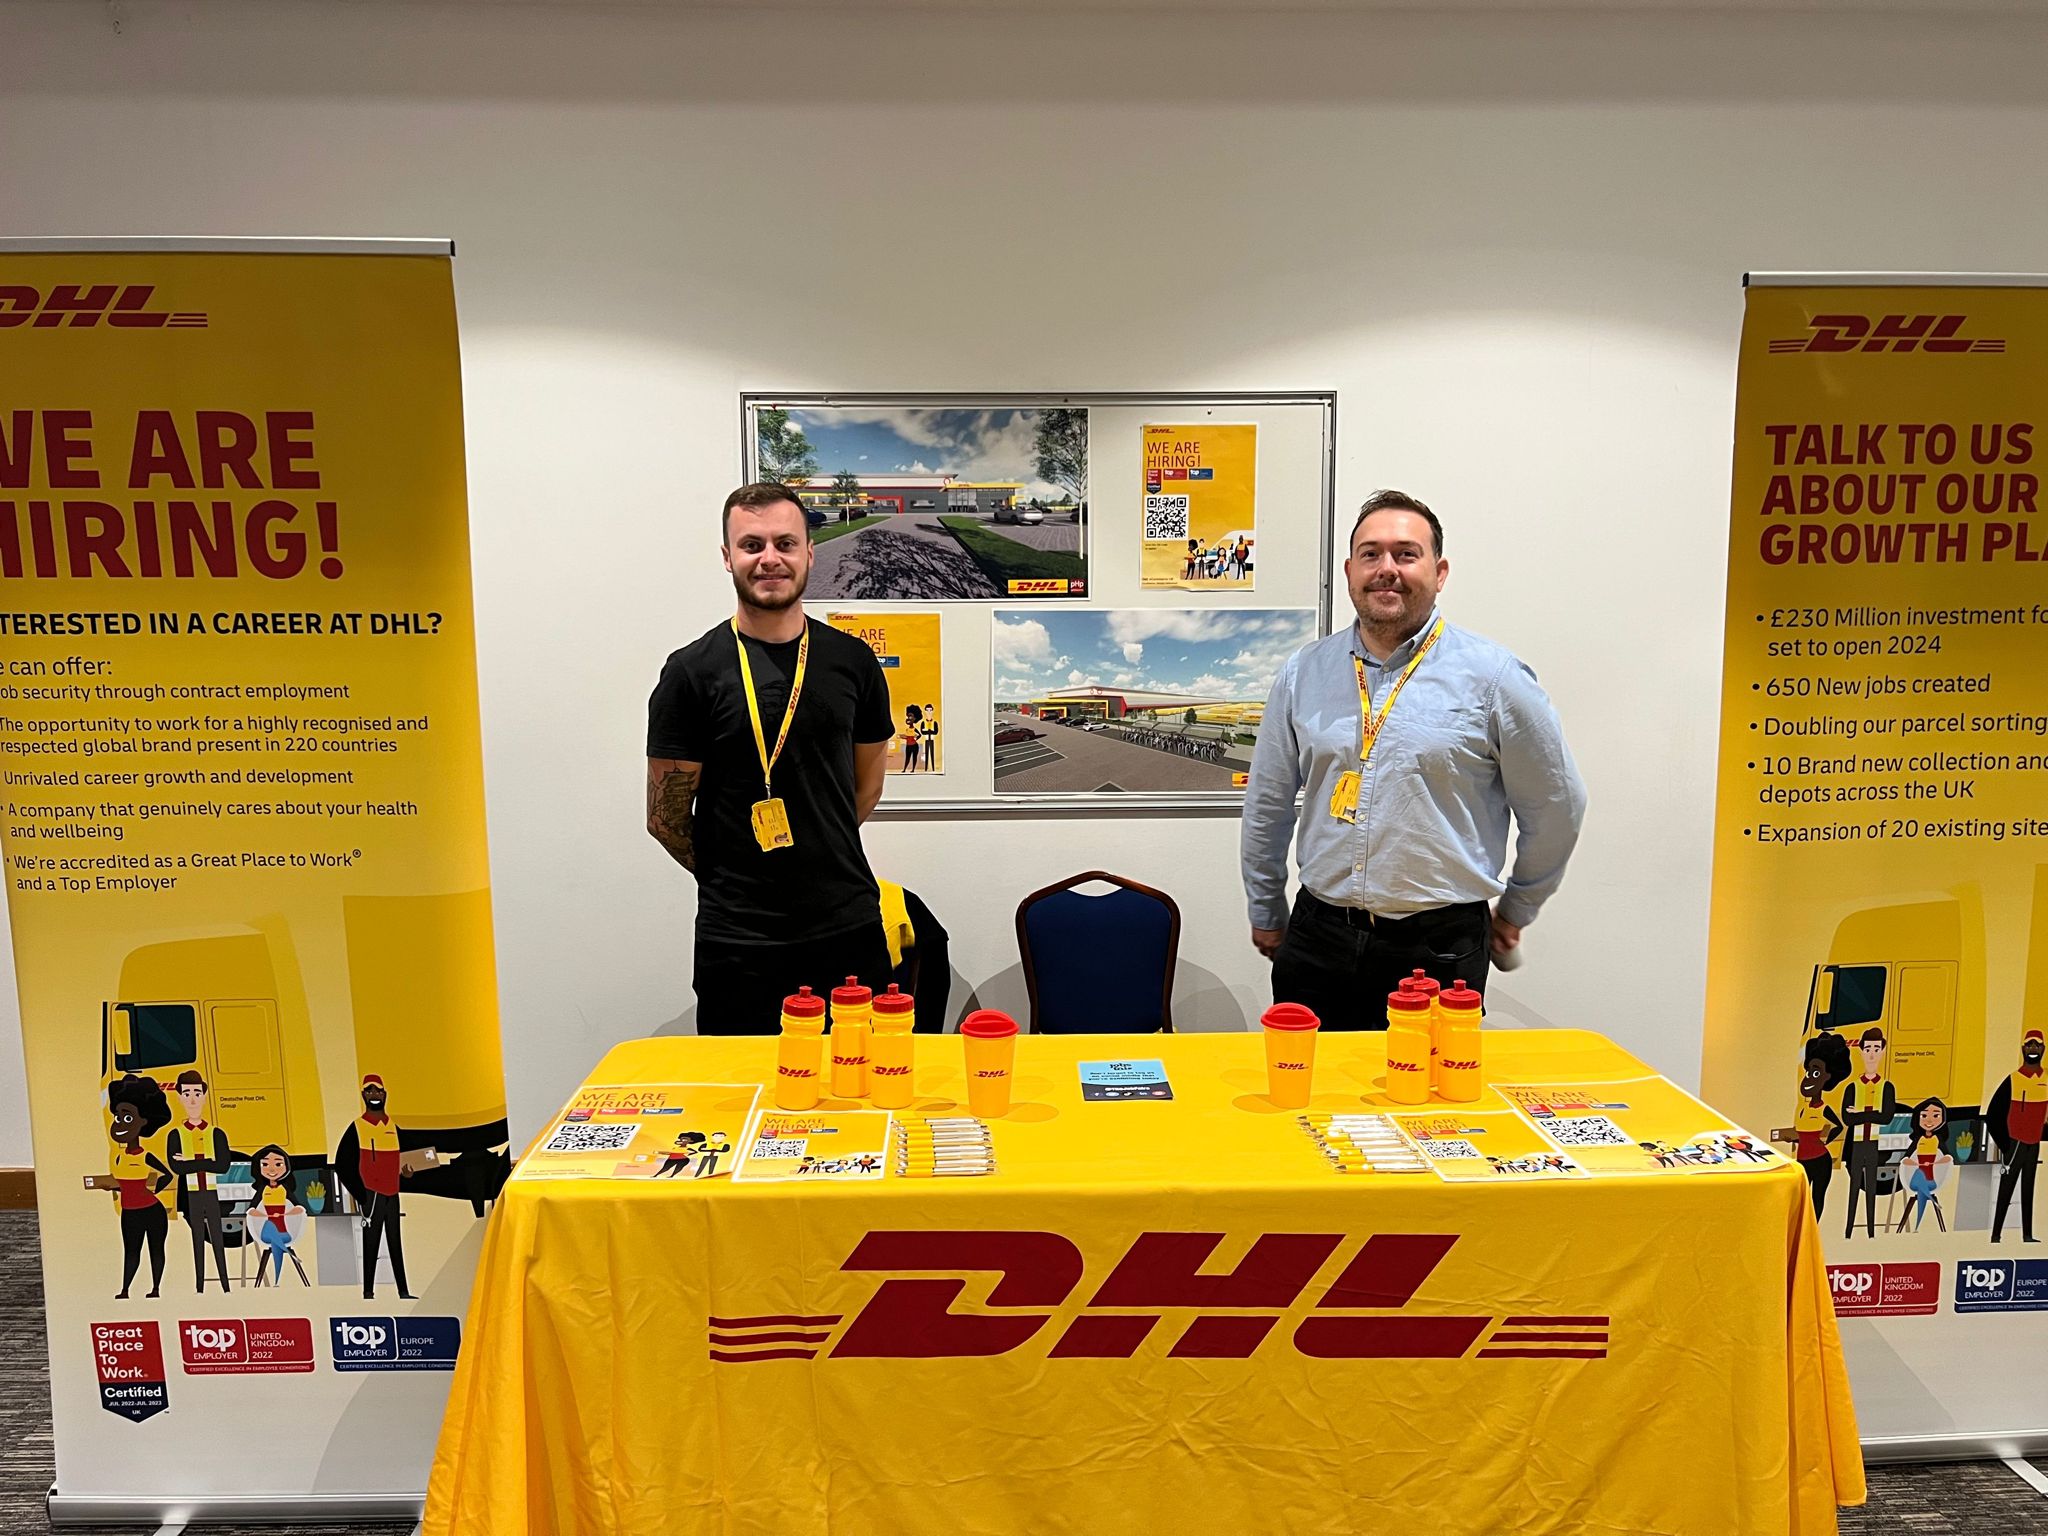 DHL at our event in Coventry